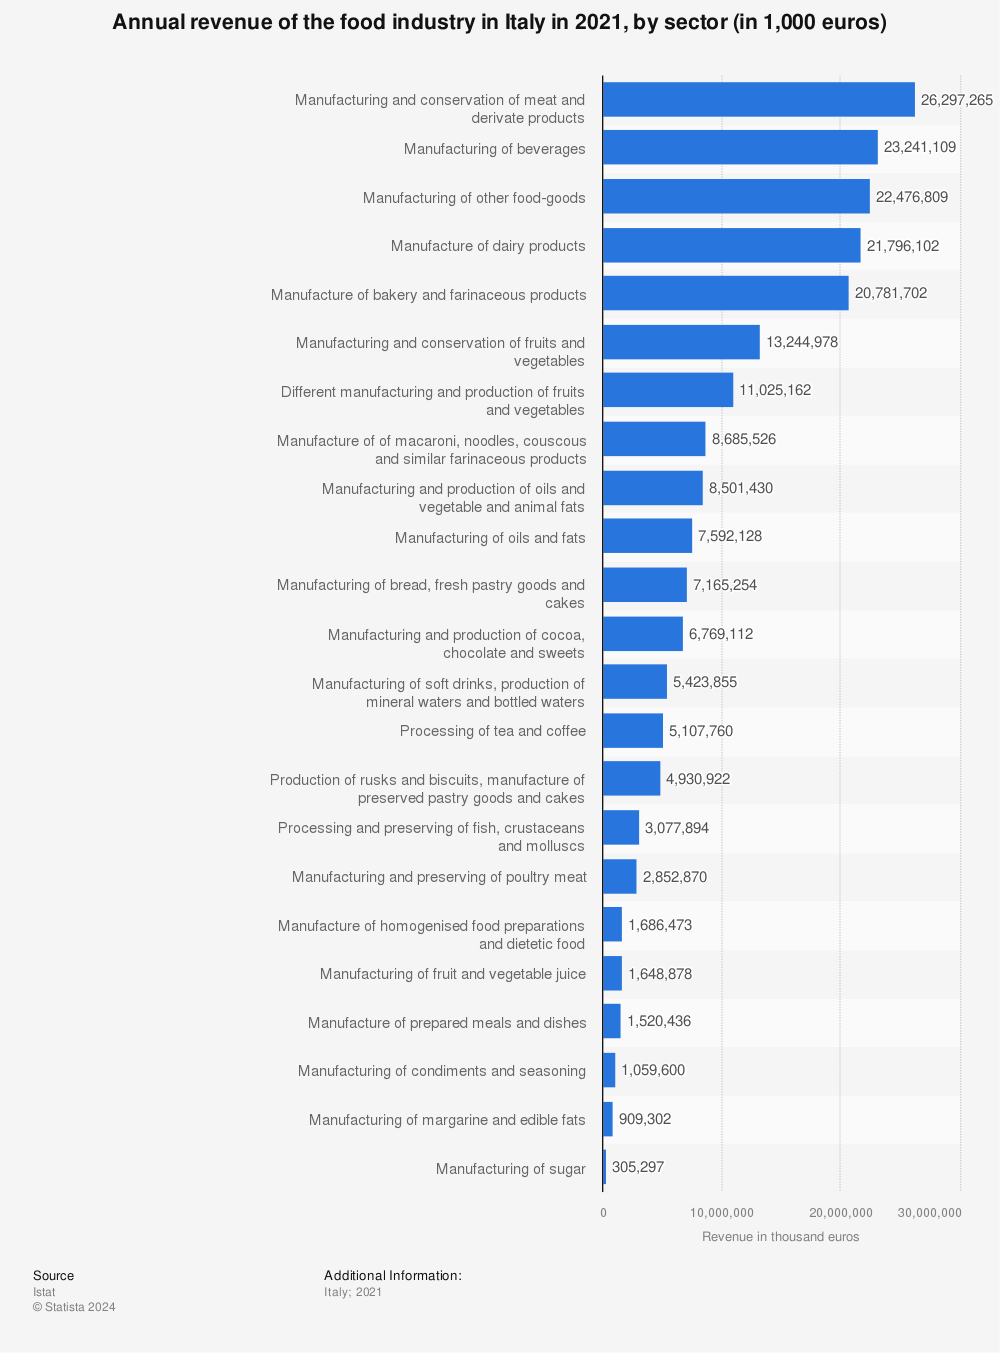 Statistic: Annual revenue of the food industry in Italy in 2021, by sector (in 1,000 euros) | Statista